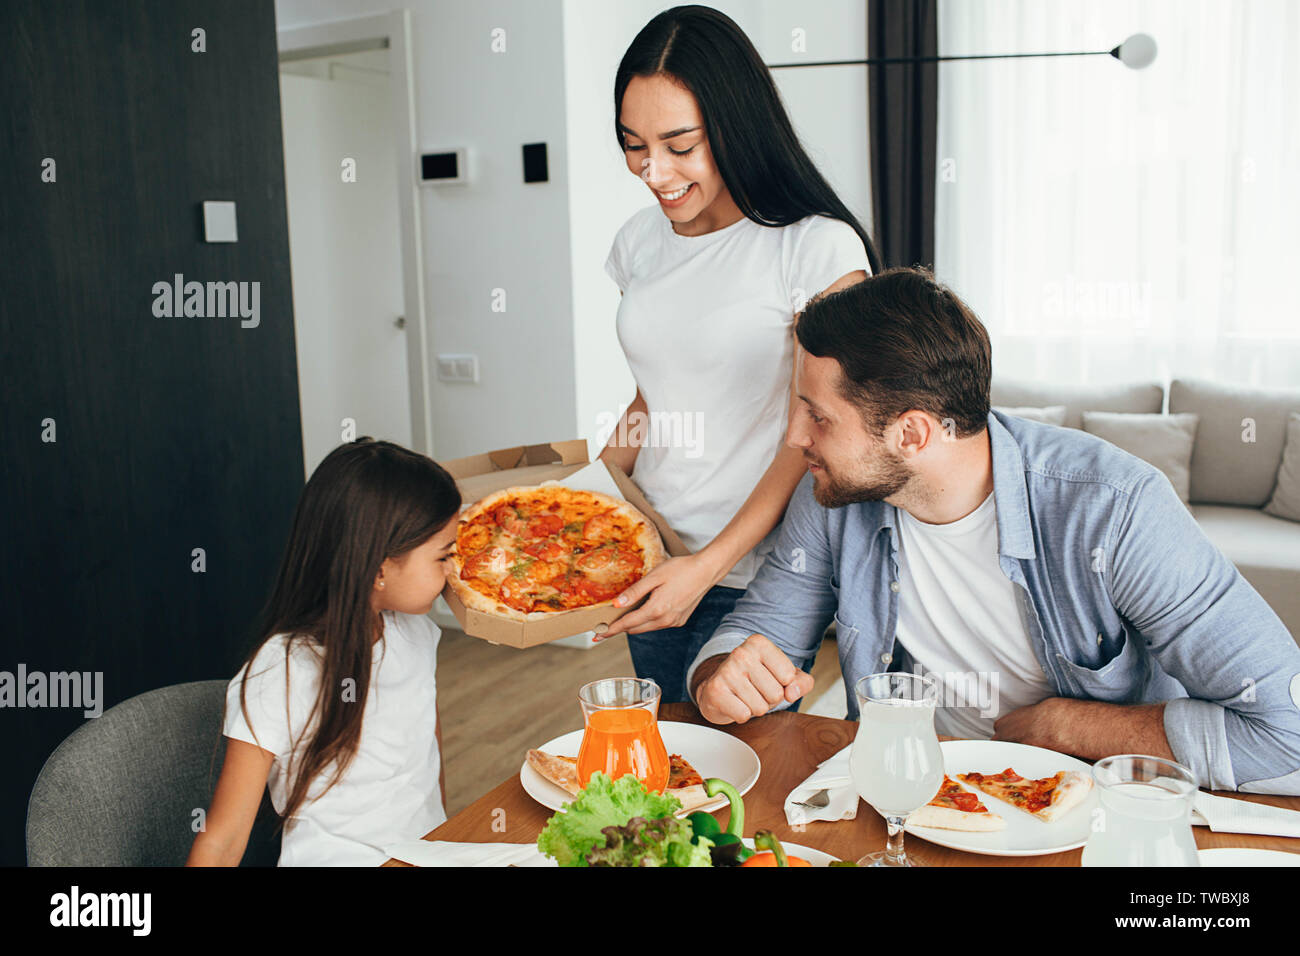 Family enjoying pizza lunch. Father, mother and daughter during dinner.Eating delicious pizza with family Stock Photo